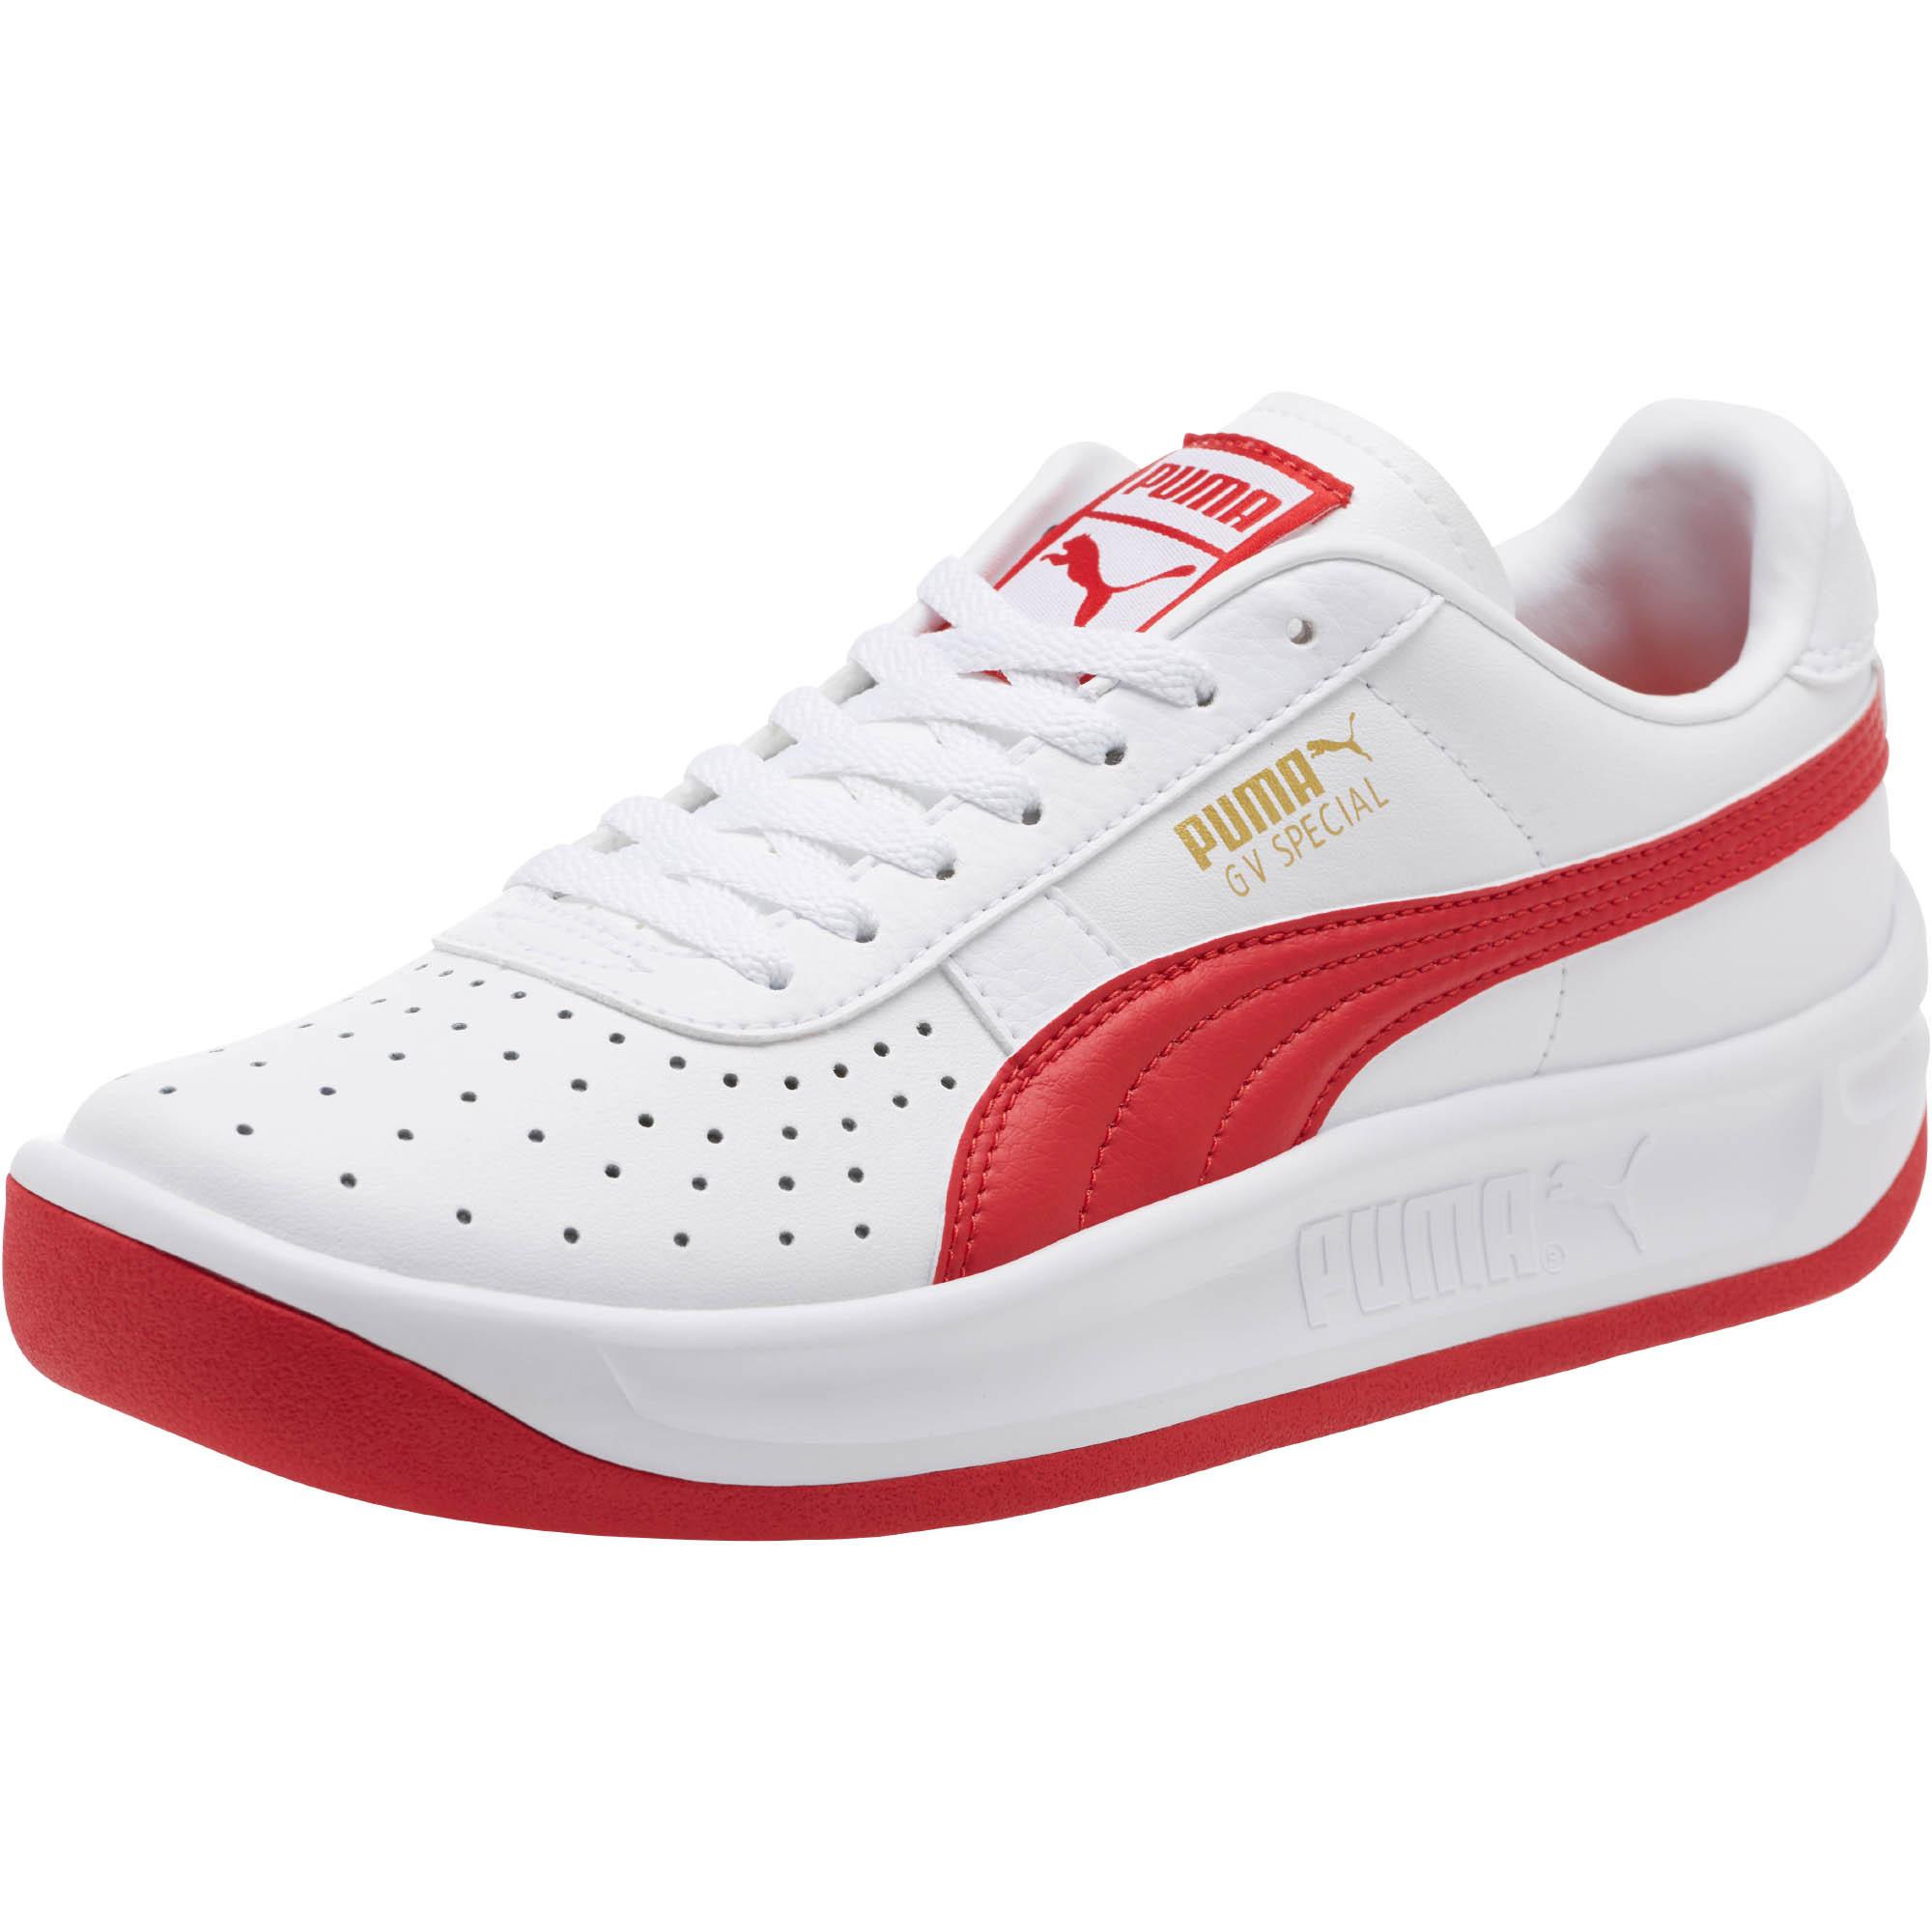 PUMA Leather Gv Special+ Sneakers in Red - Lyst